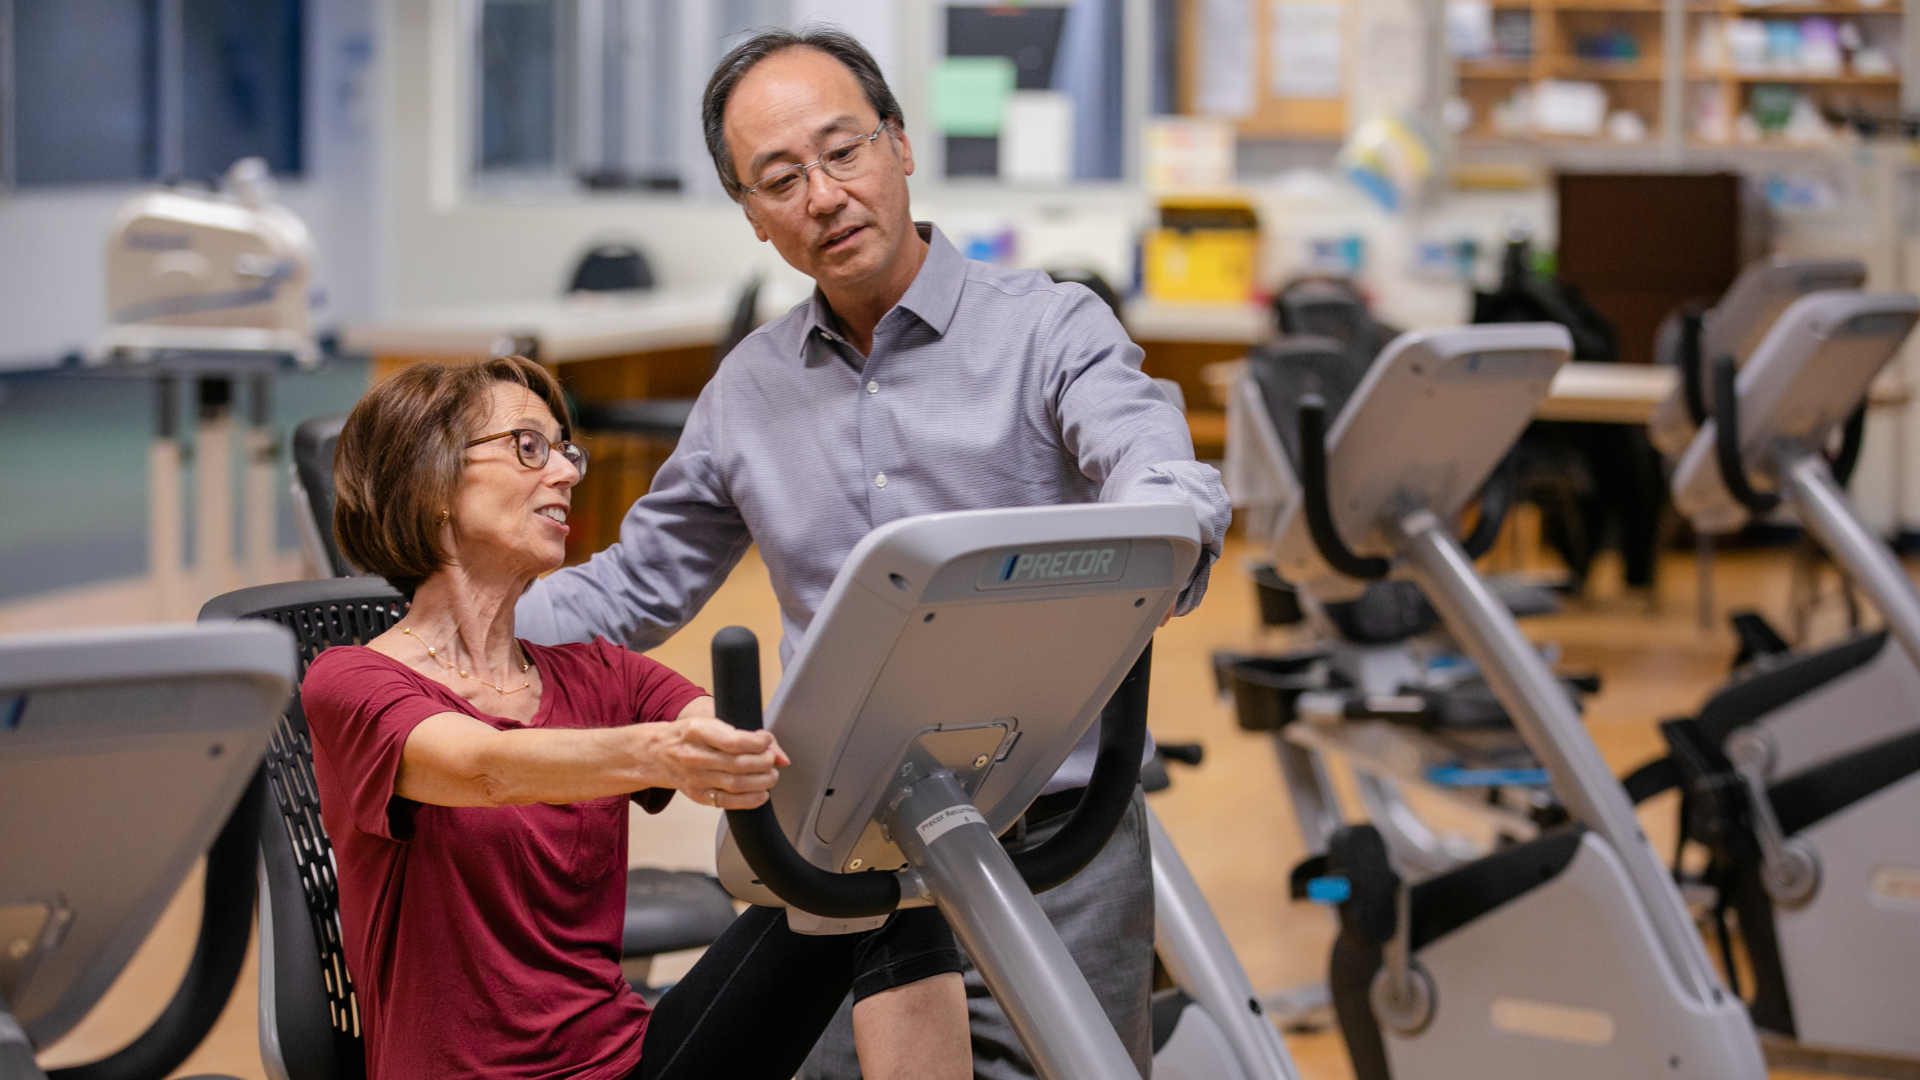 Toronto Rehab's exercise machine with a patient and doctor